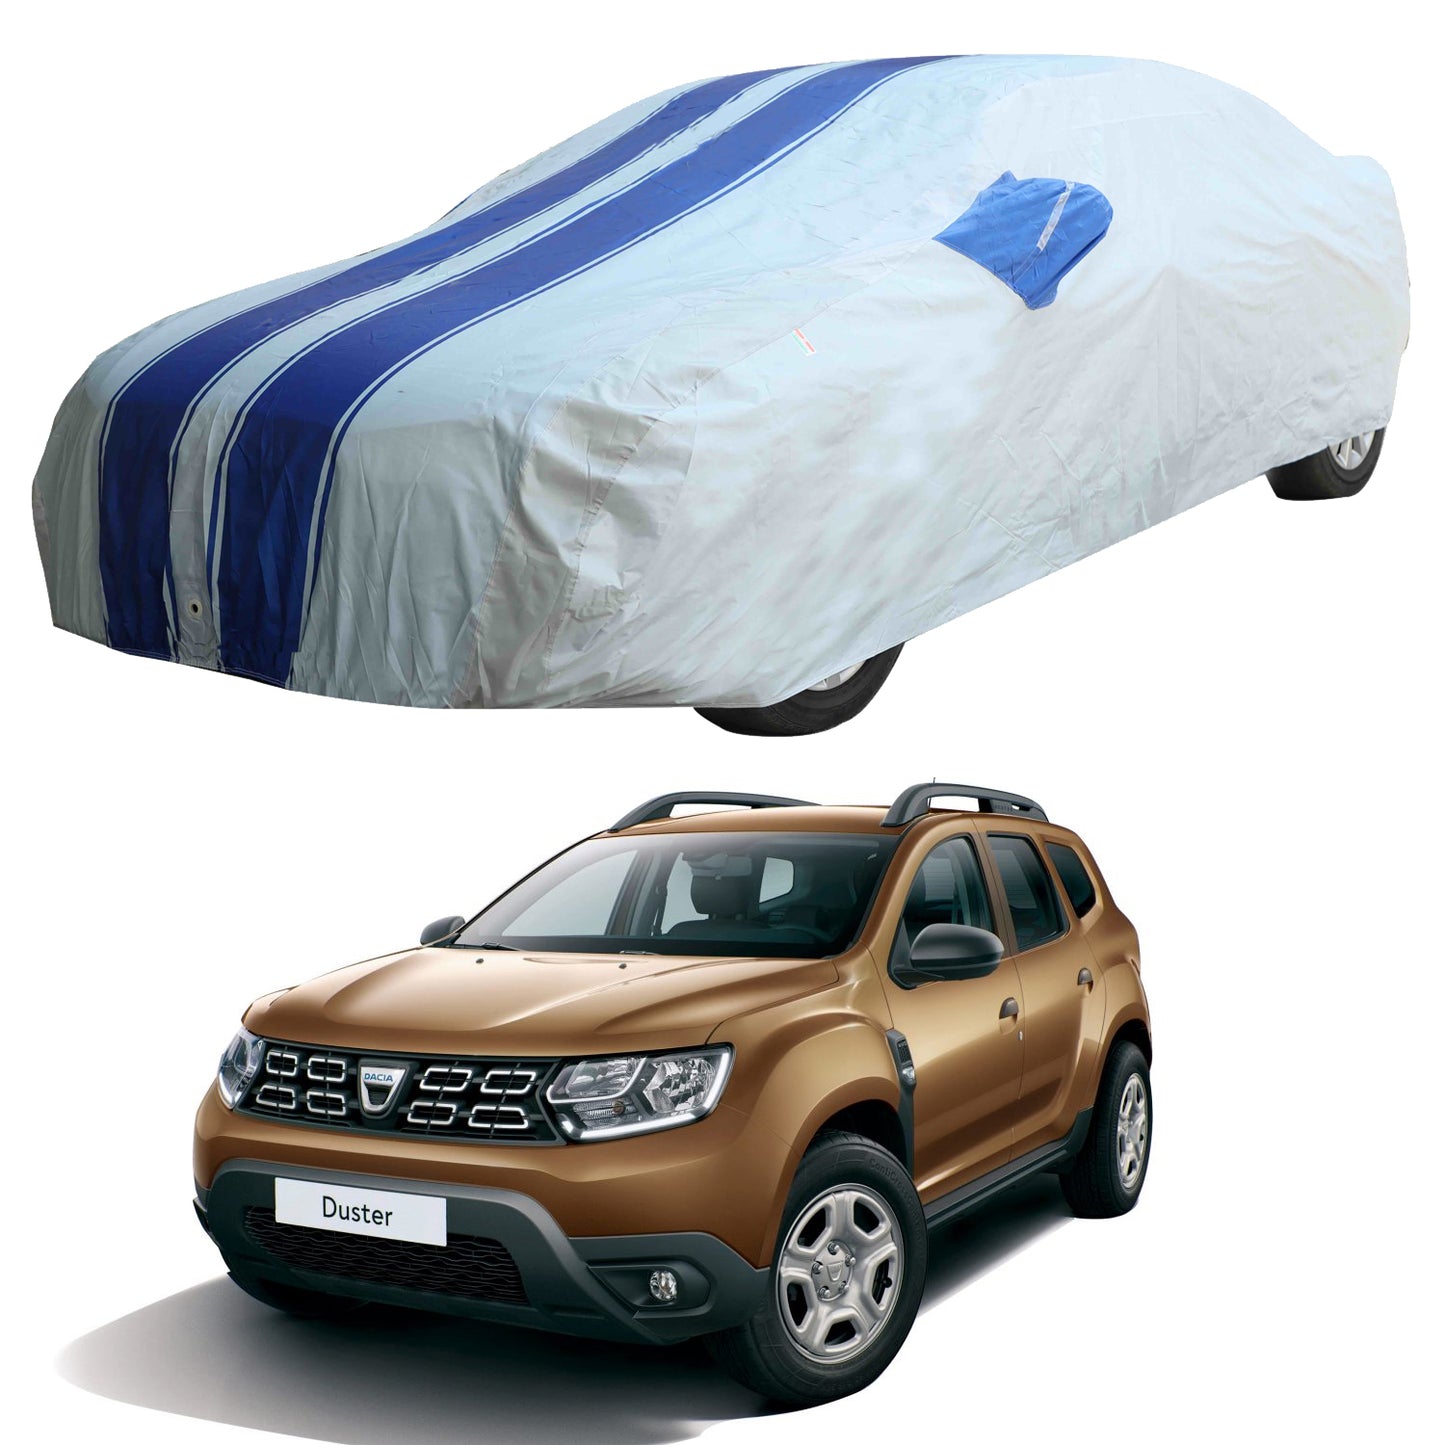 Oshotto 100% Blue dustproof and Water Resistant Car Body Cover